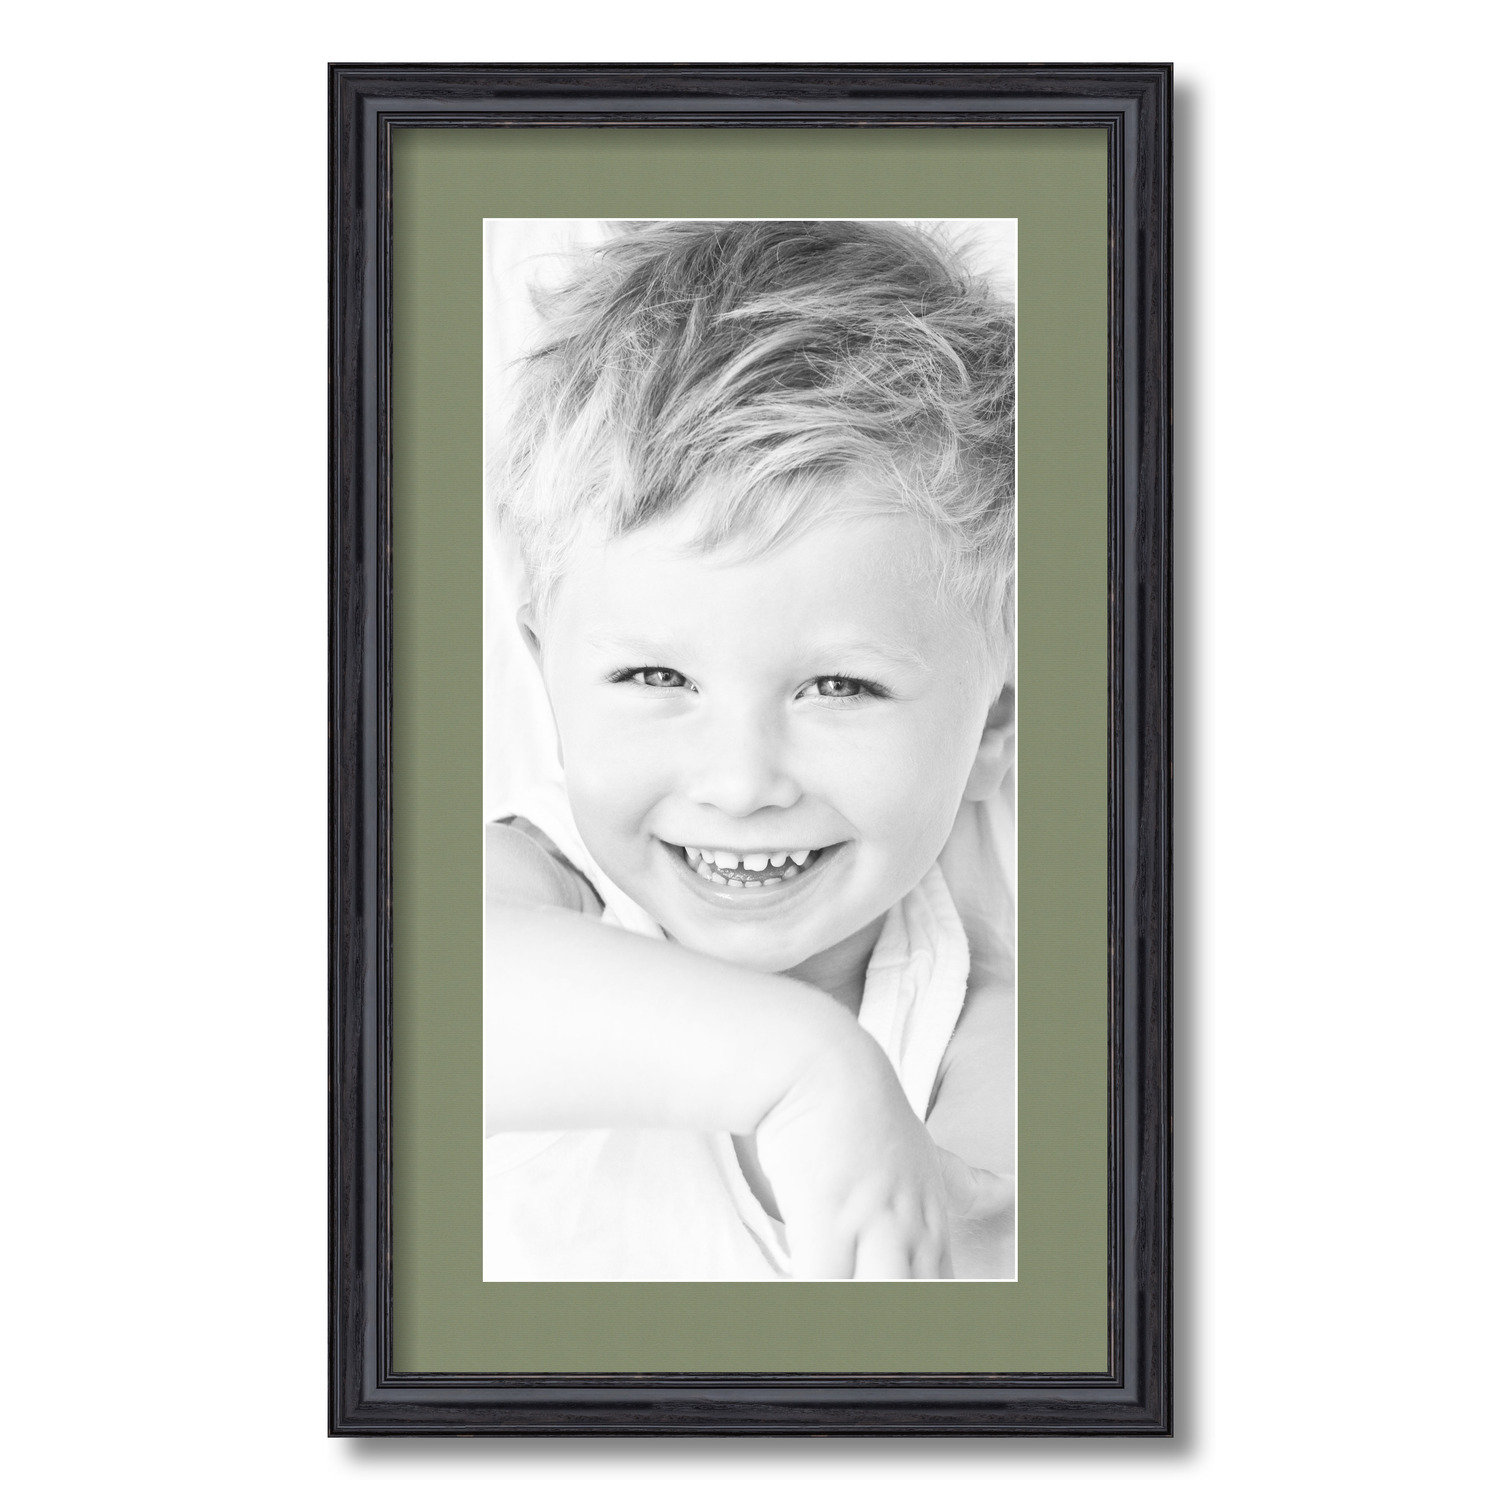 Snap 10x20 Black Wood Picture Frame 